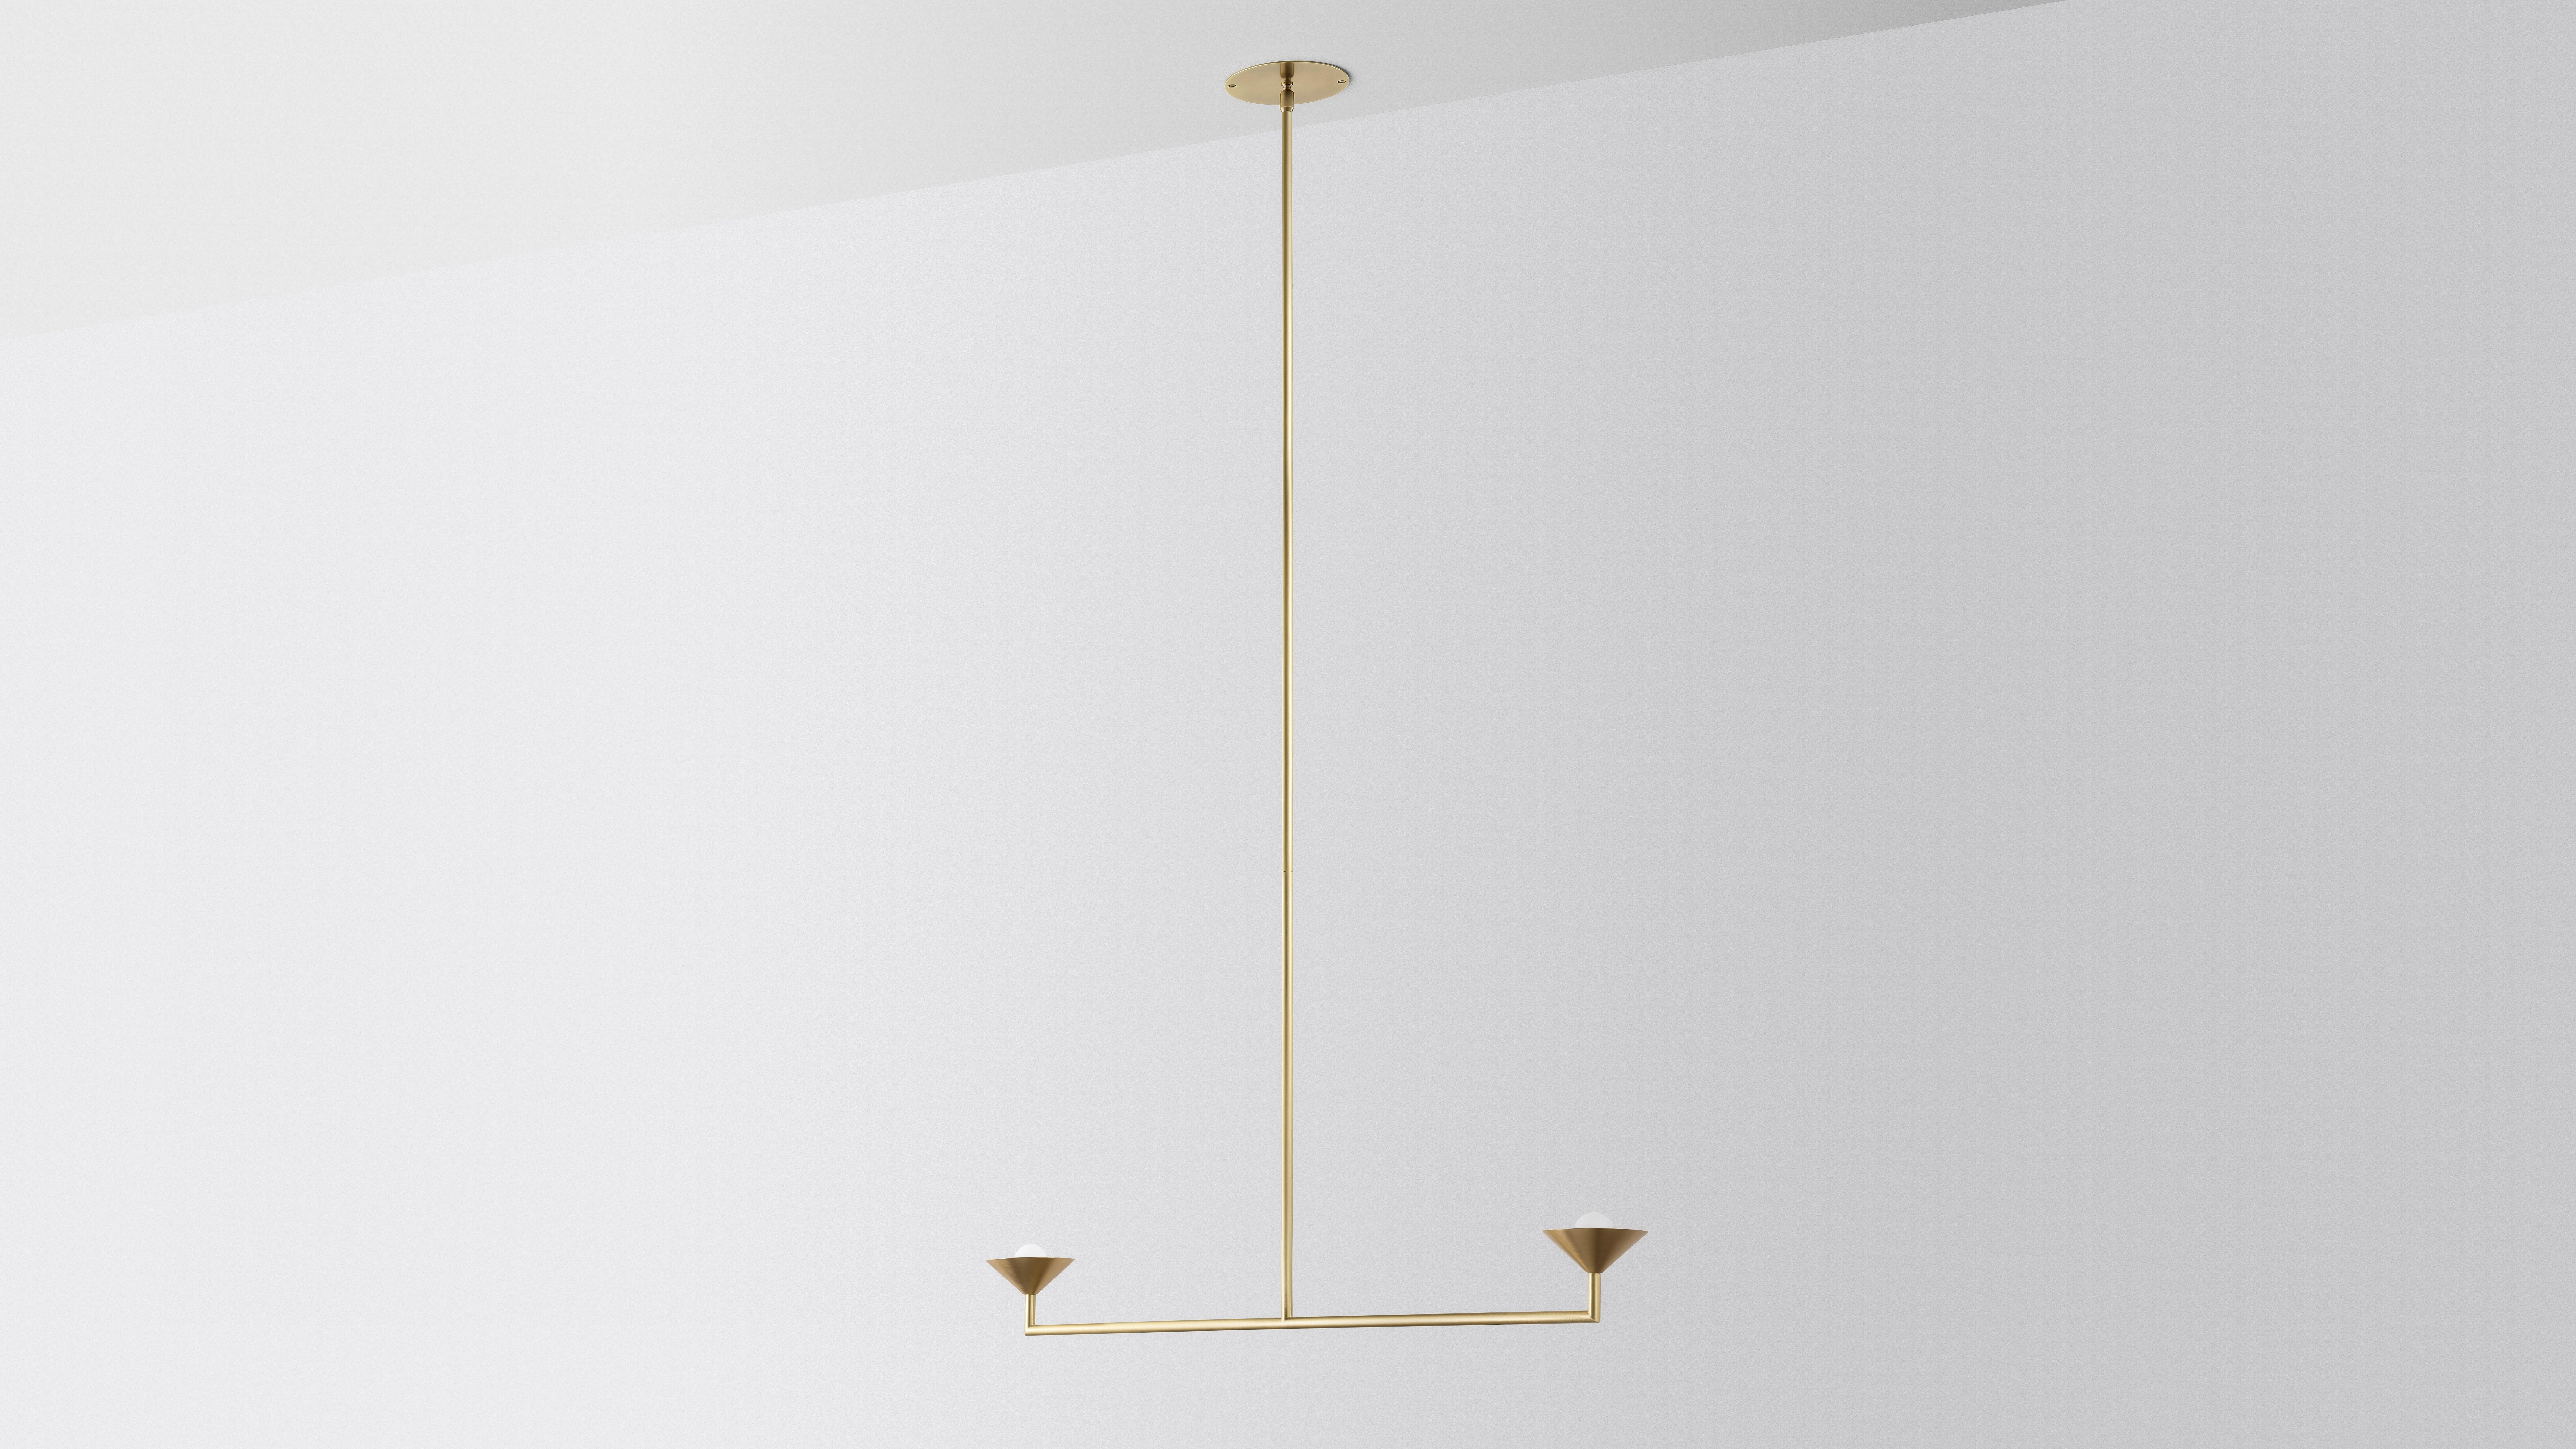 Double drop by Volker Haug
Pyramid scheme series
Dimensions: W 90.5, D 15 H 70 cm
Support: 15 cm
Suspension: min 70 cm
Material: Brass
Finishes: Polished, brushed or bronzed brass, enamel or chrome-plated.
Custom finishes available on